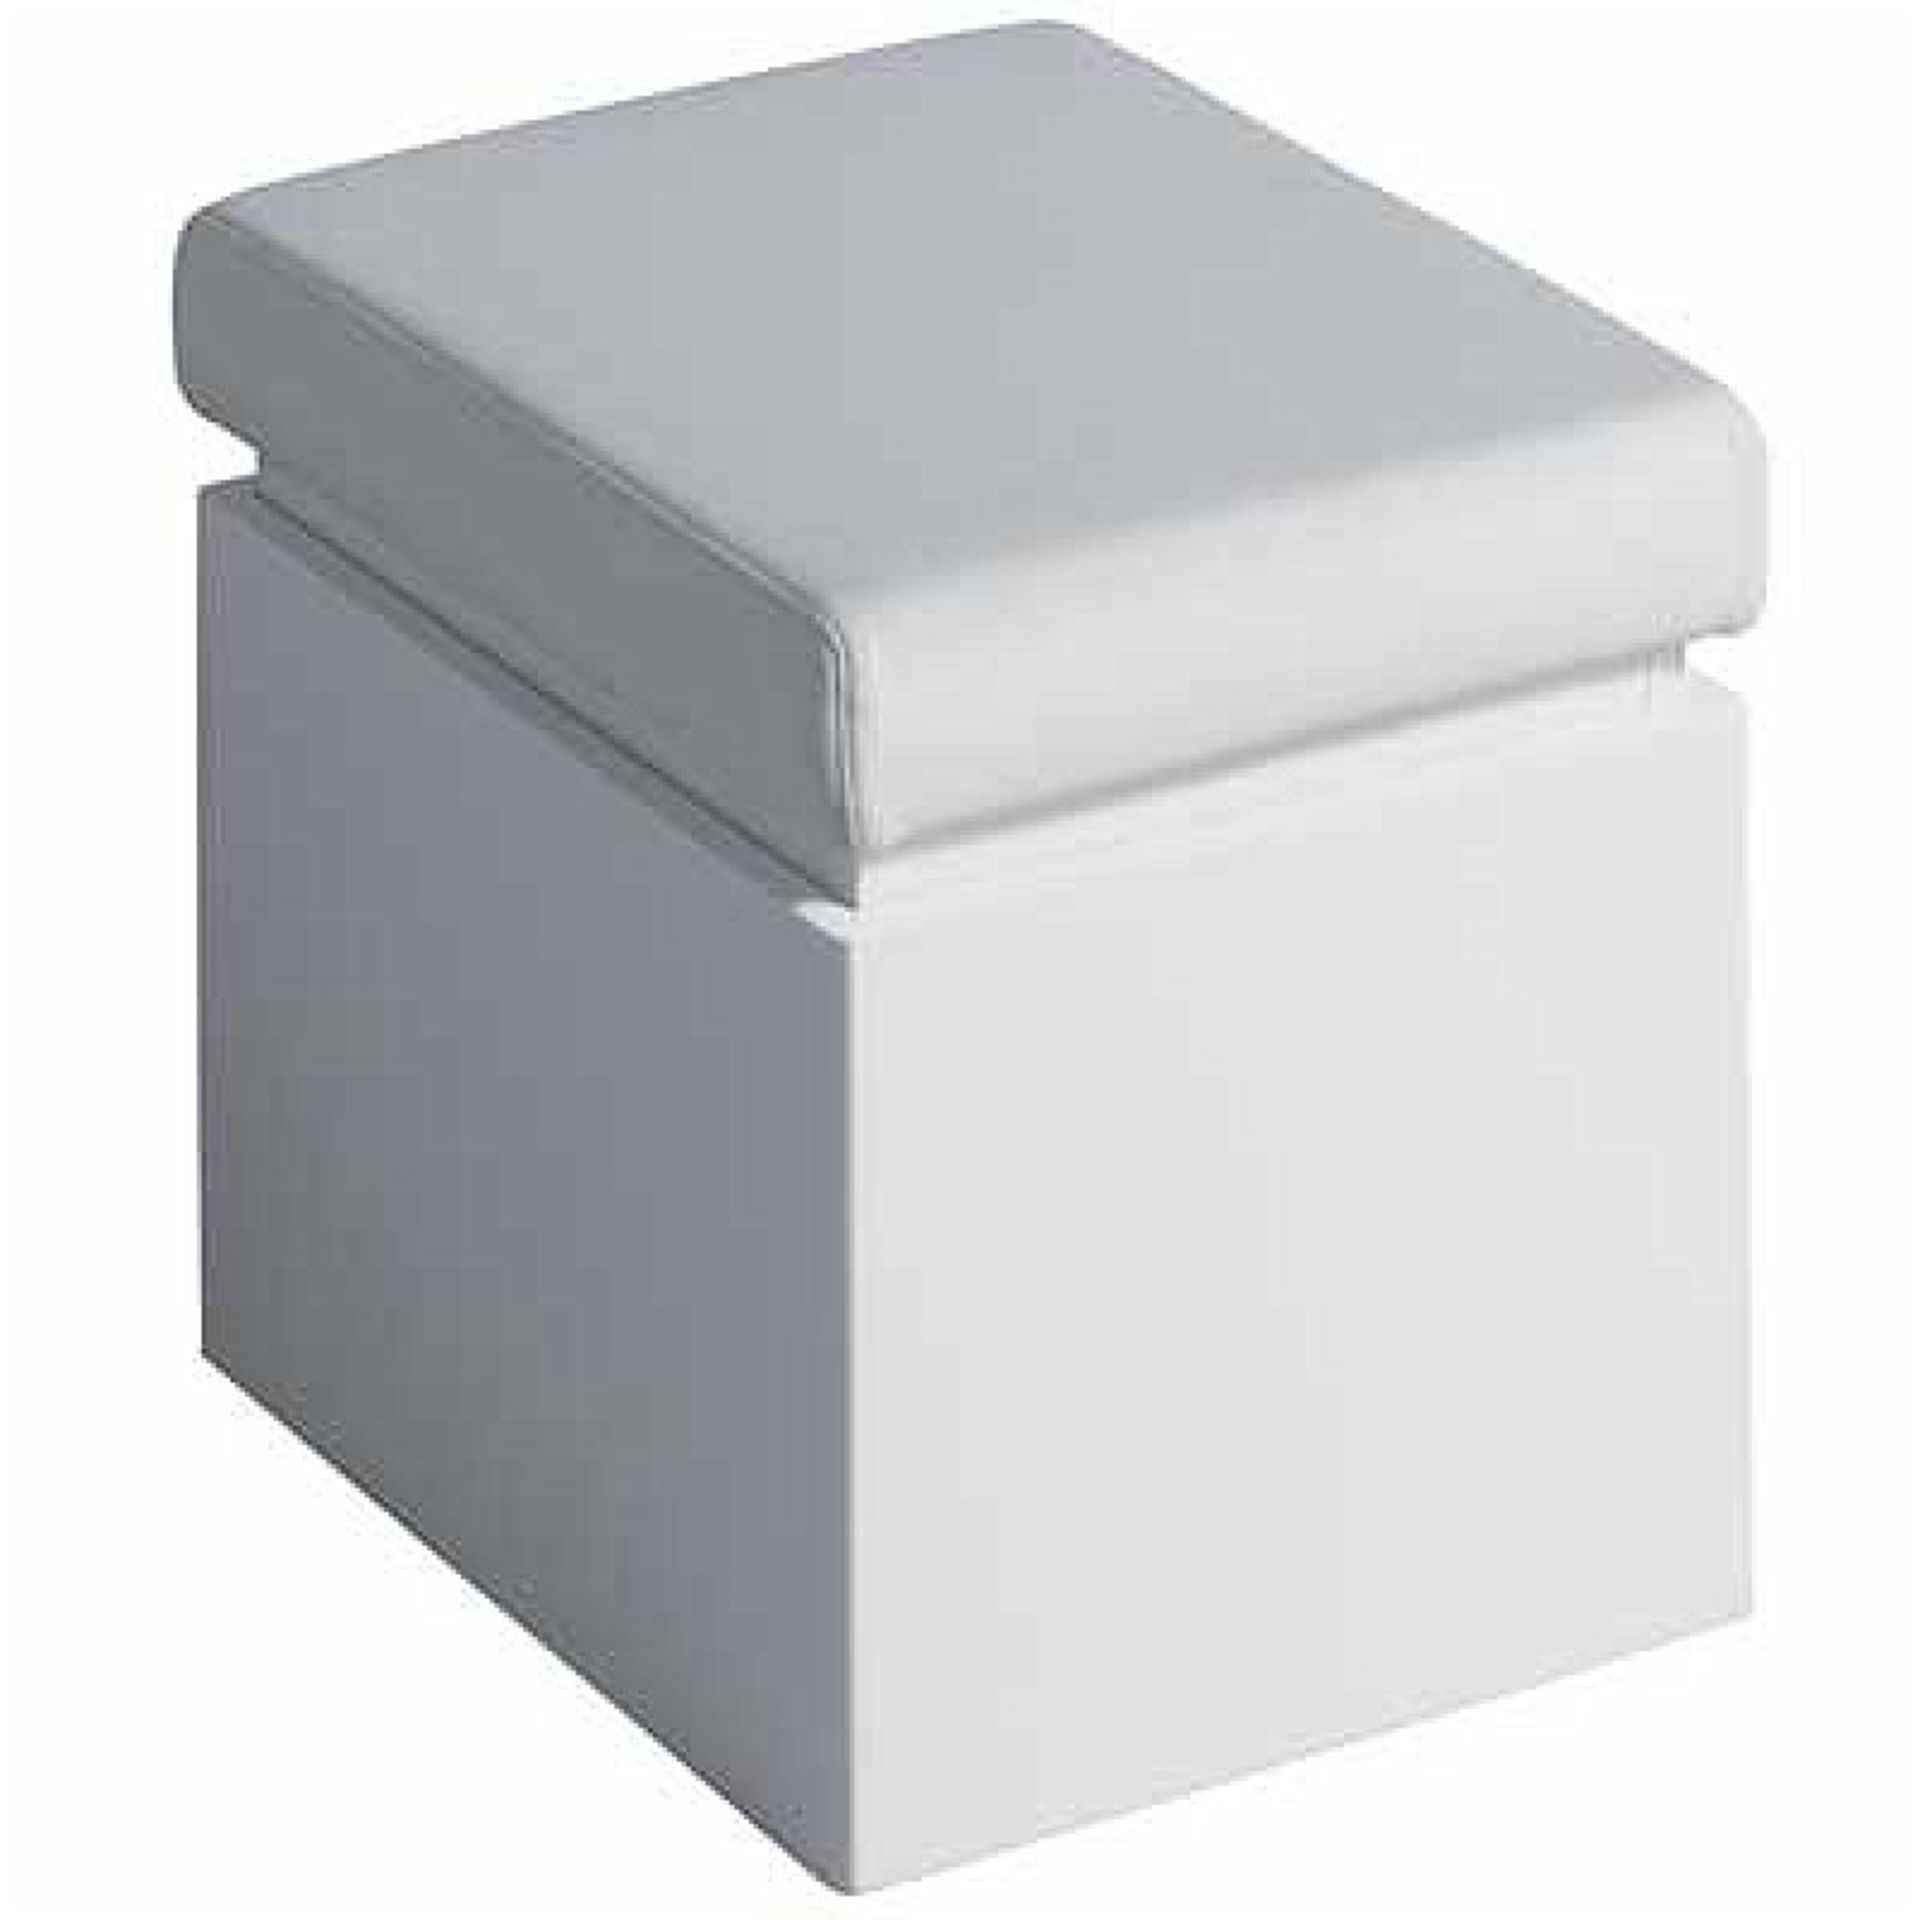 New Twyford White Bathroom Seat With Storage. RRP £254.99.Ta0901Wh. The Twyford White Bathroo... - Image 2 of 2